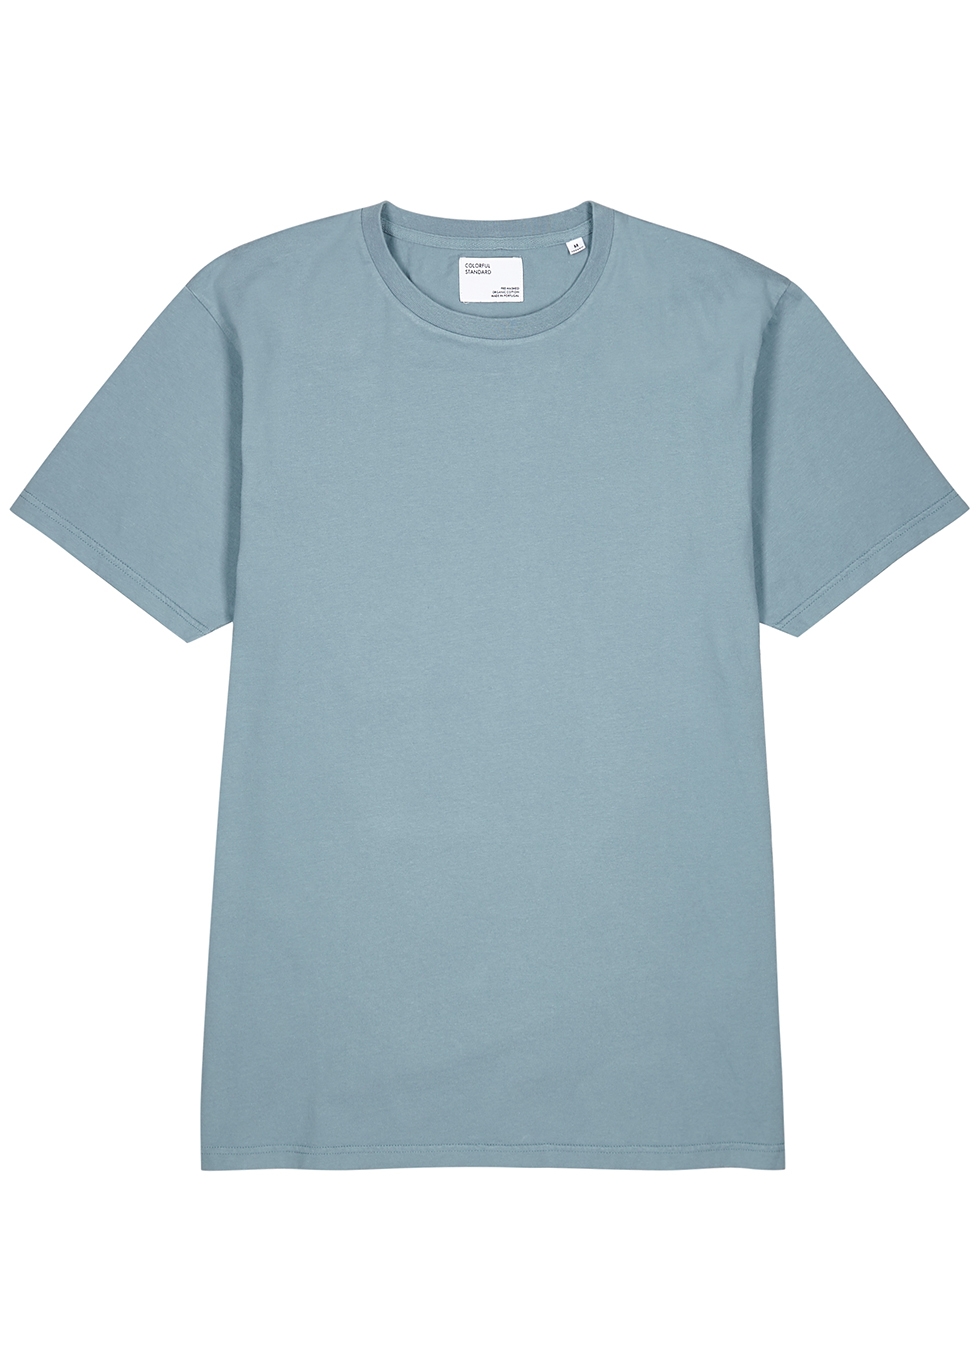 COLORFUL STANDARD Navy cotton T-shirt